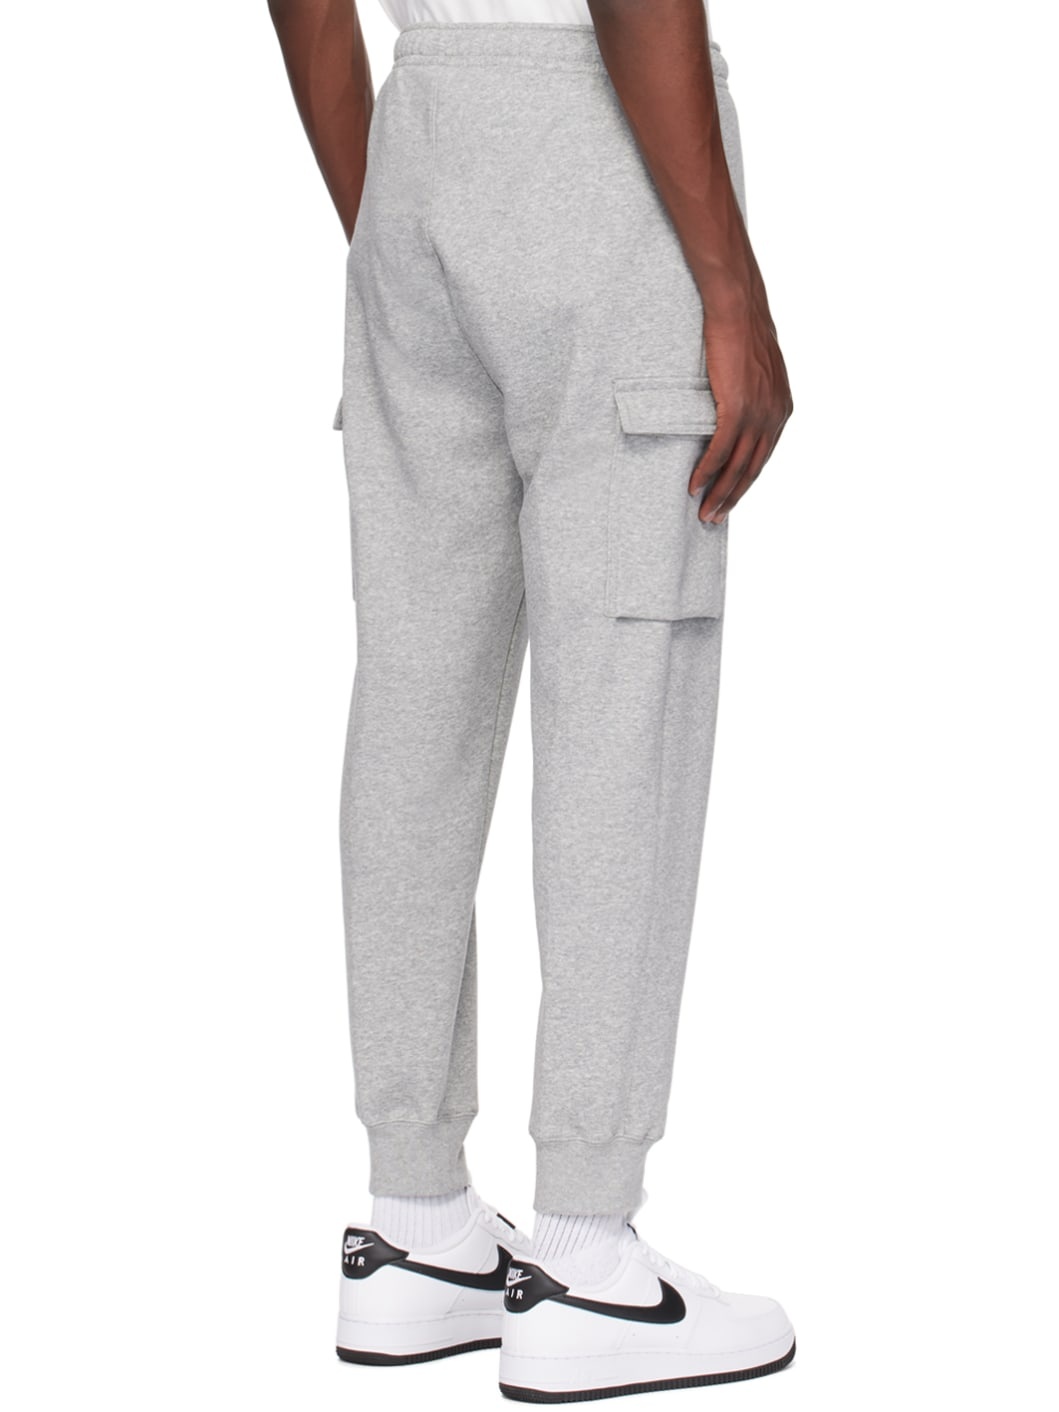 Gray Embroidered Cargo Pants - 3